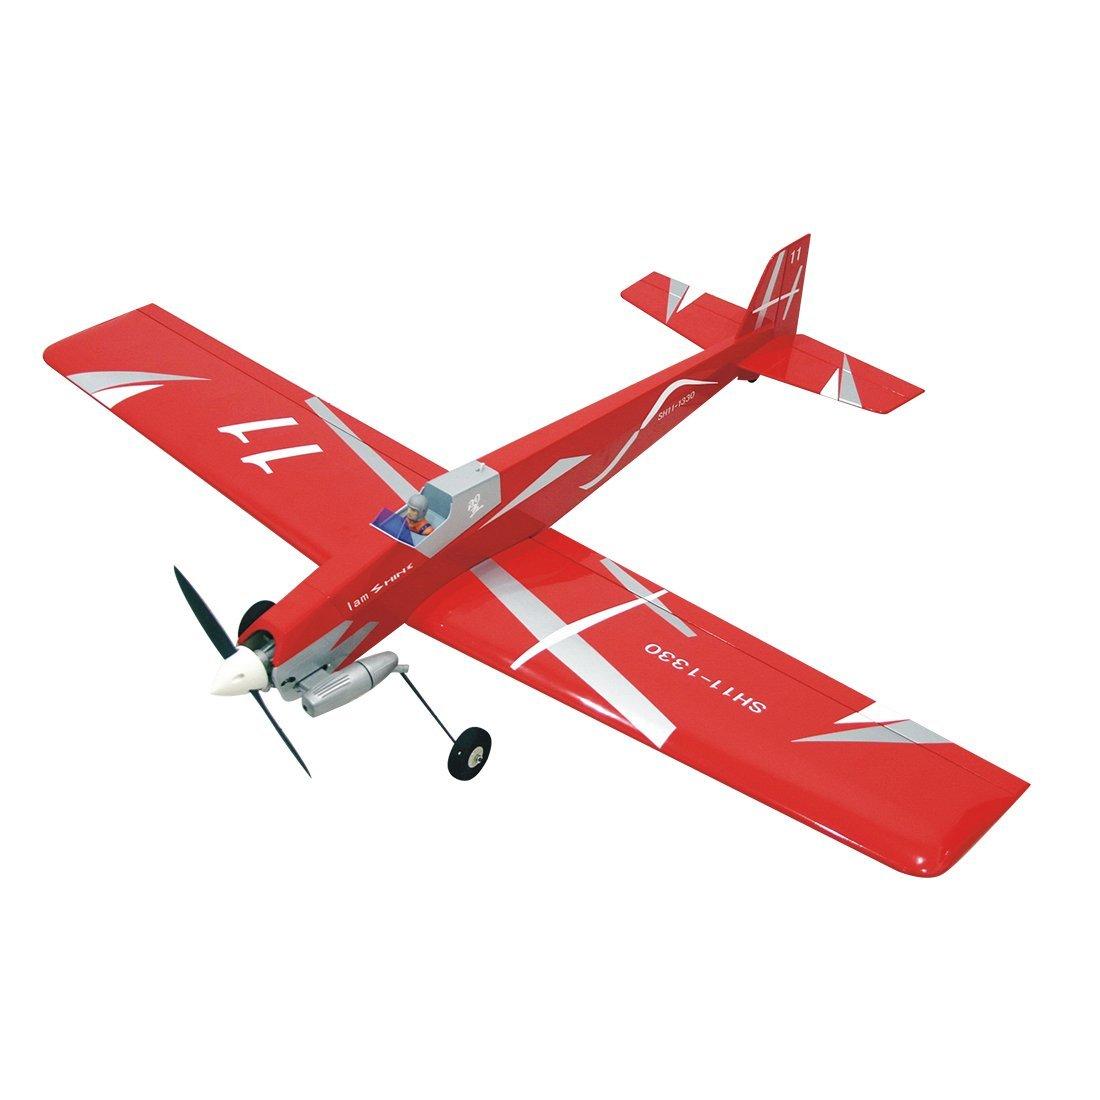 Best Gas Powered Rc Planes: Top 3 Gas-Powered RC Planes